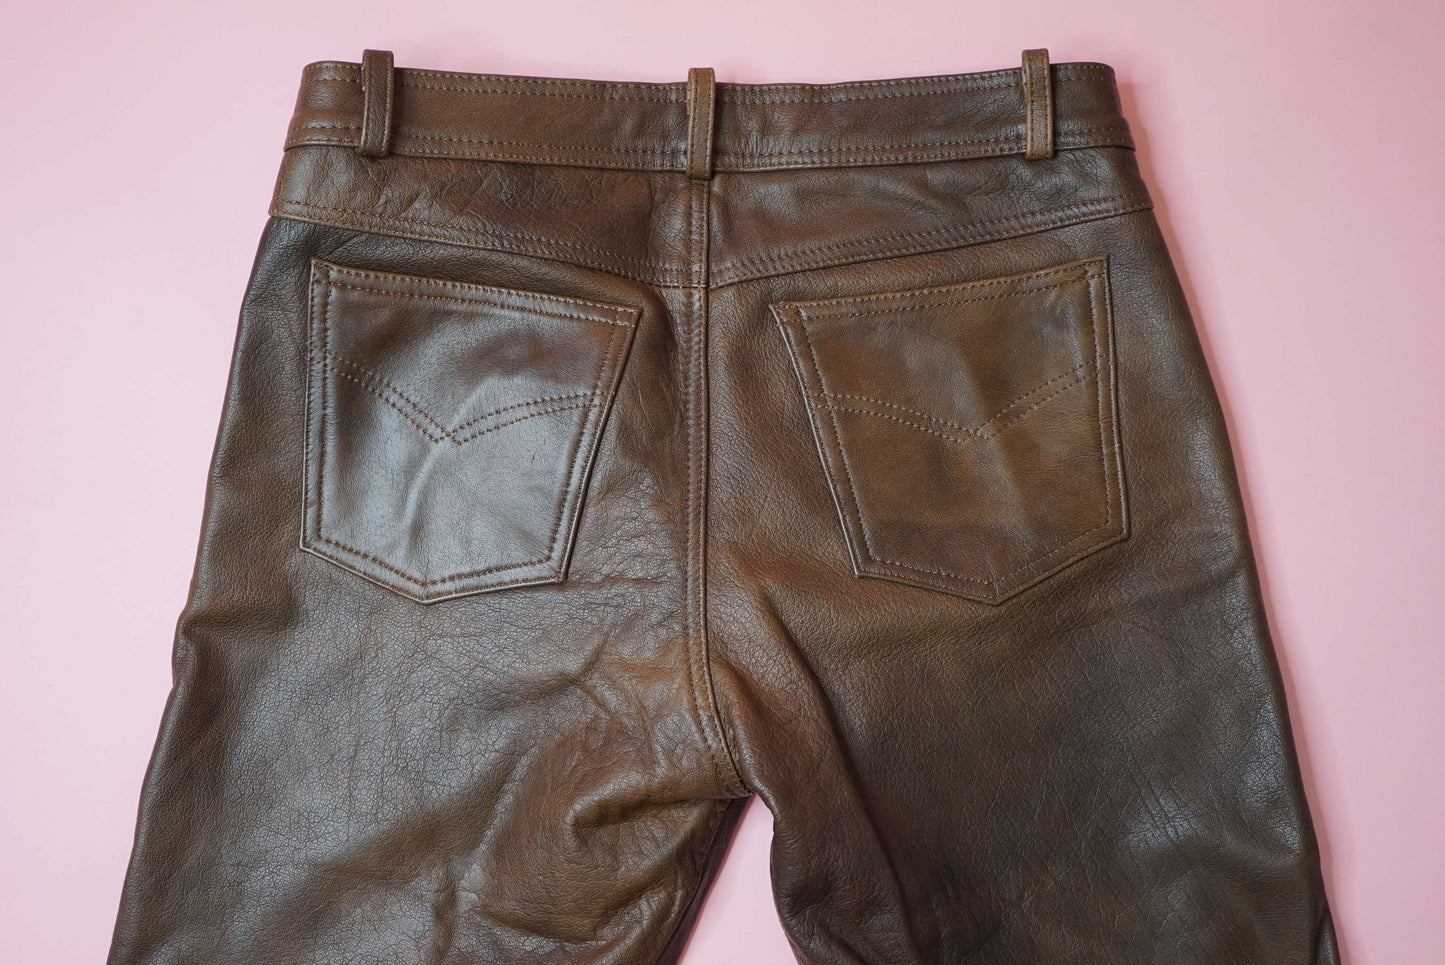 Vintage Brown Aged Leather Trousers Rocker Motorcycle Pants W34-35